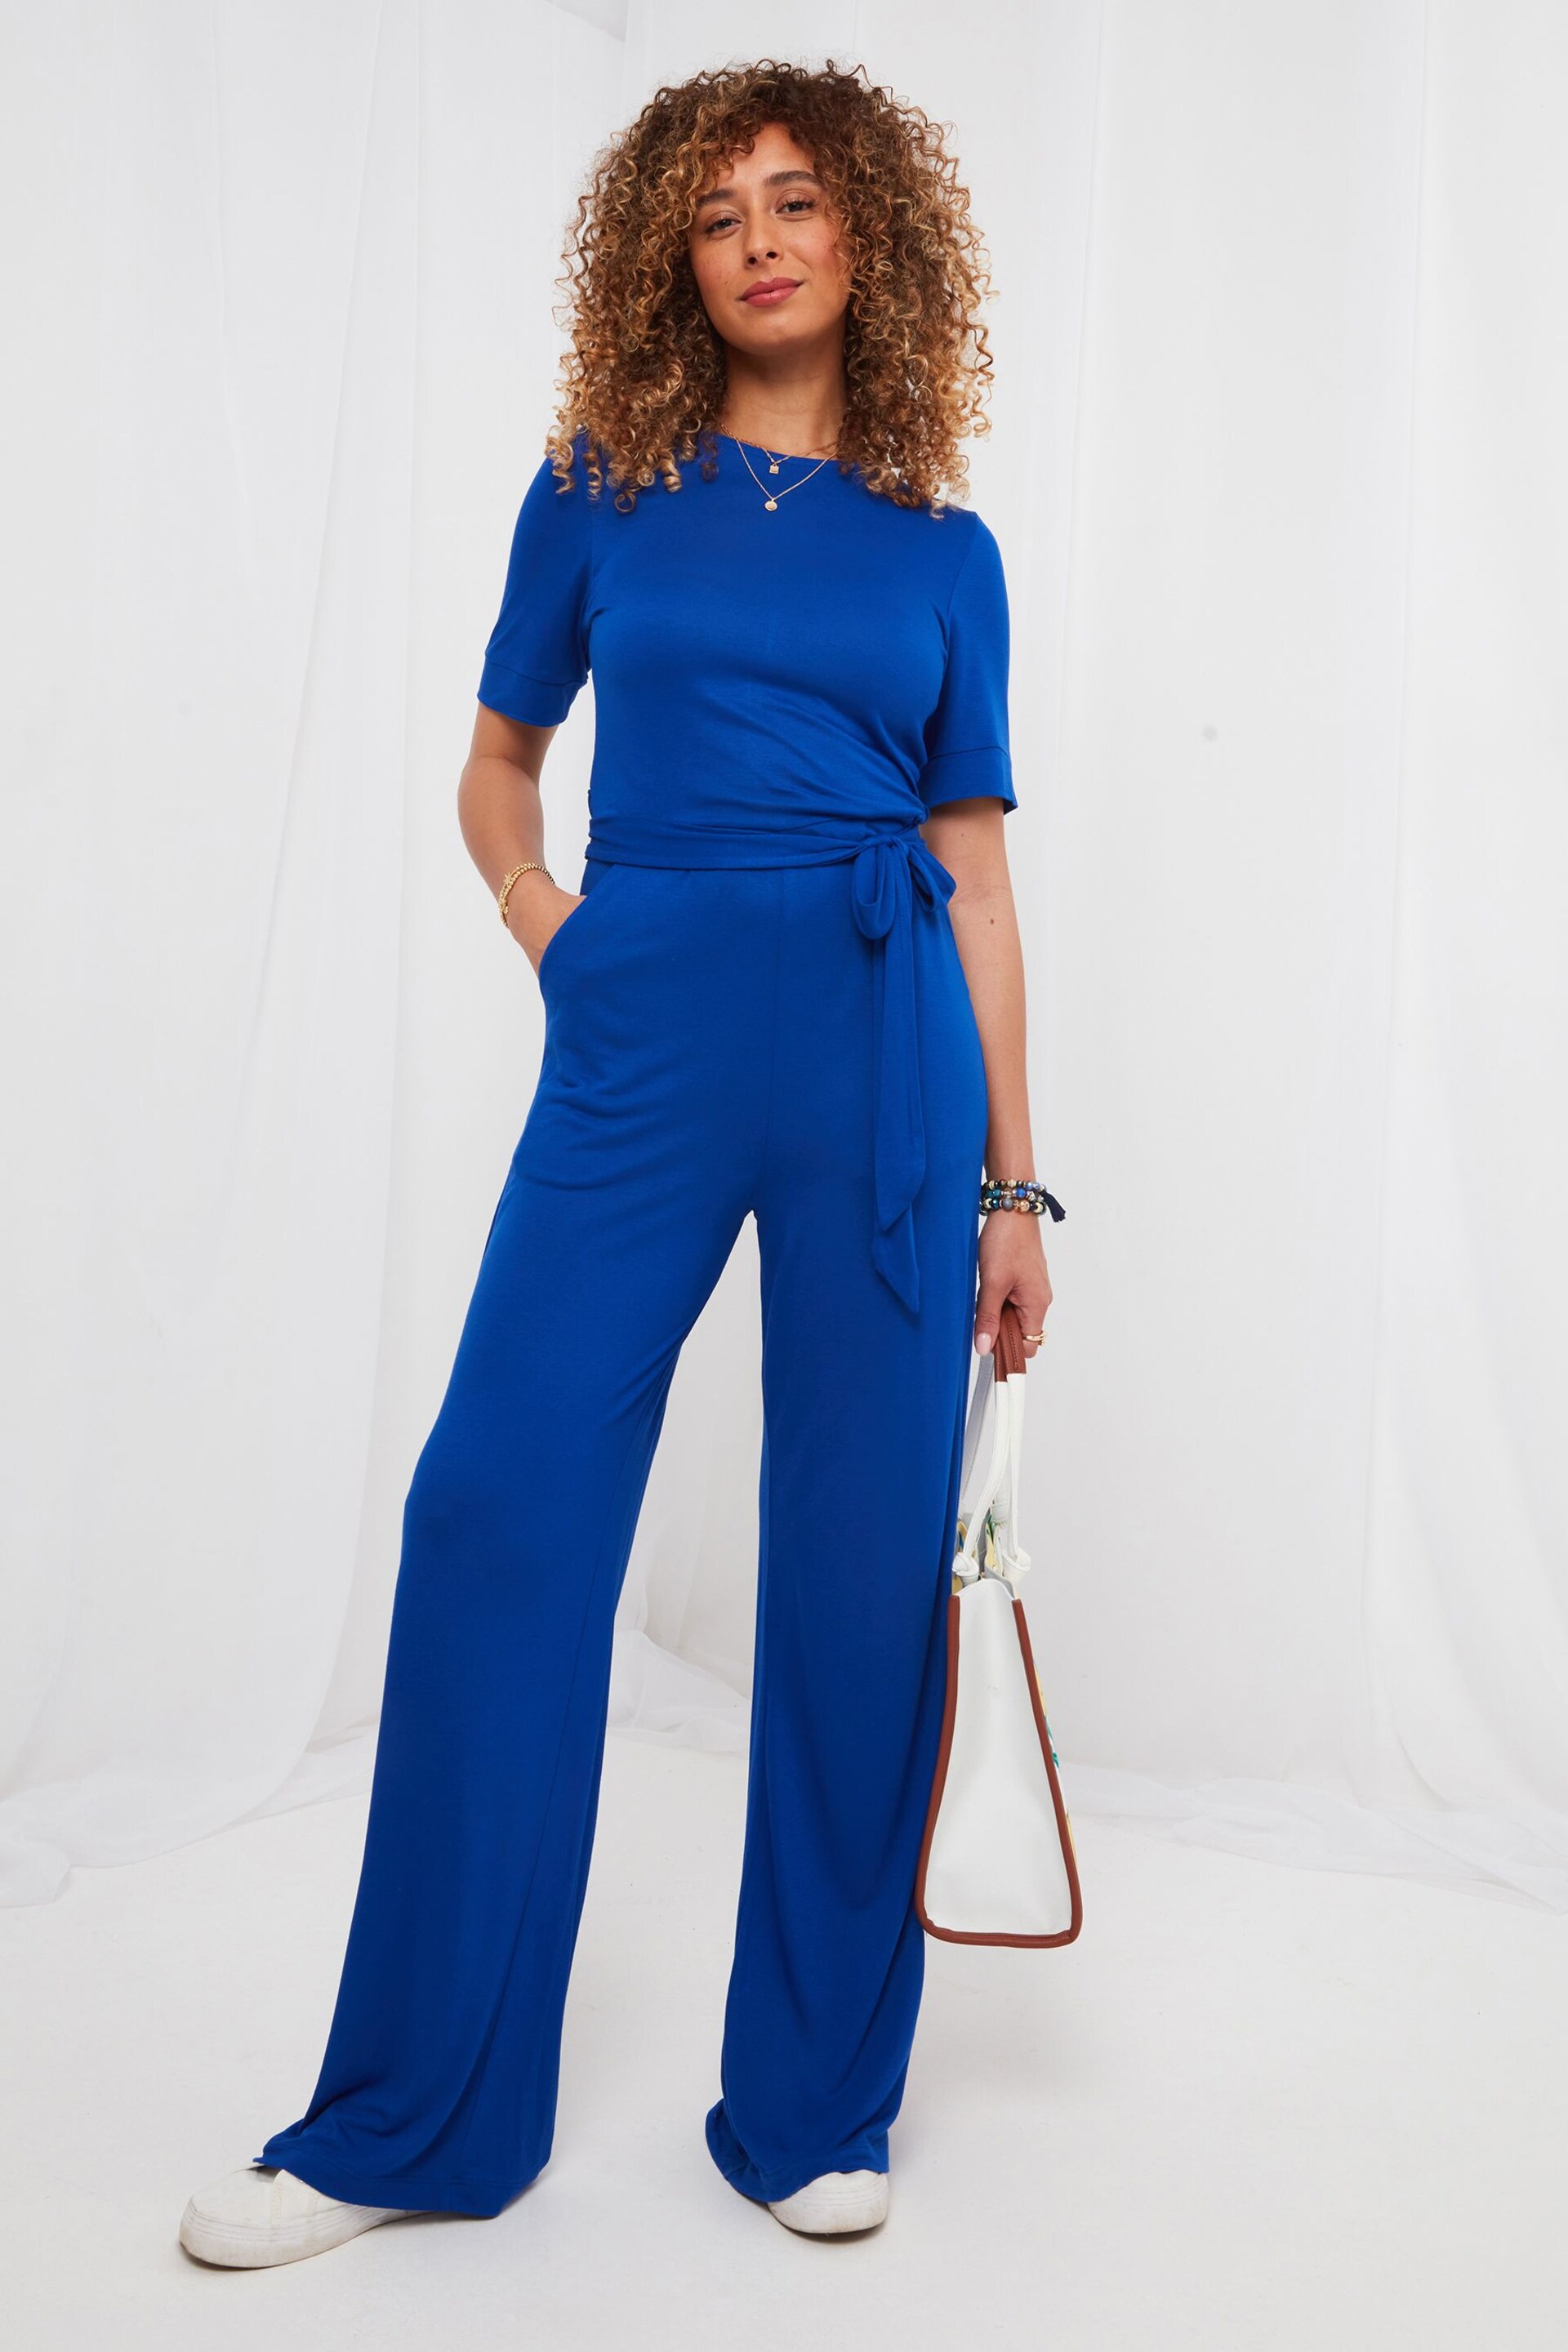 Joe Browns Blue Tilly Must Have Jumpsuit - Image 1 of 3